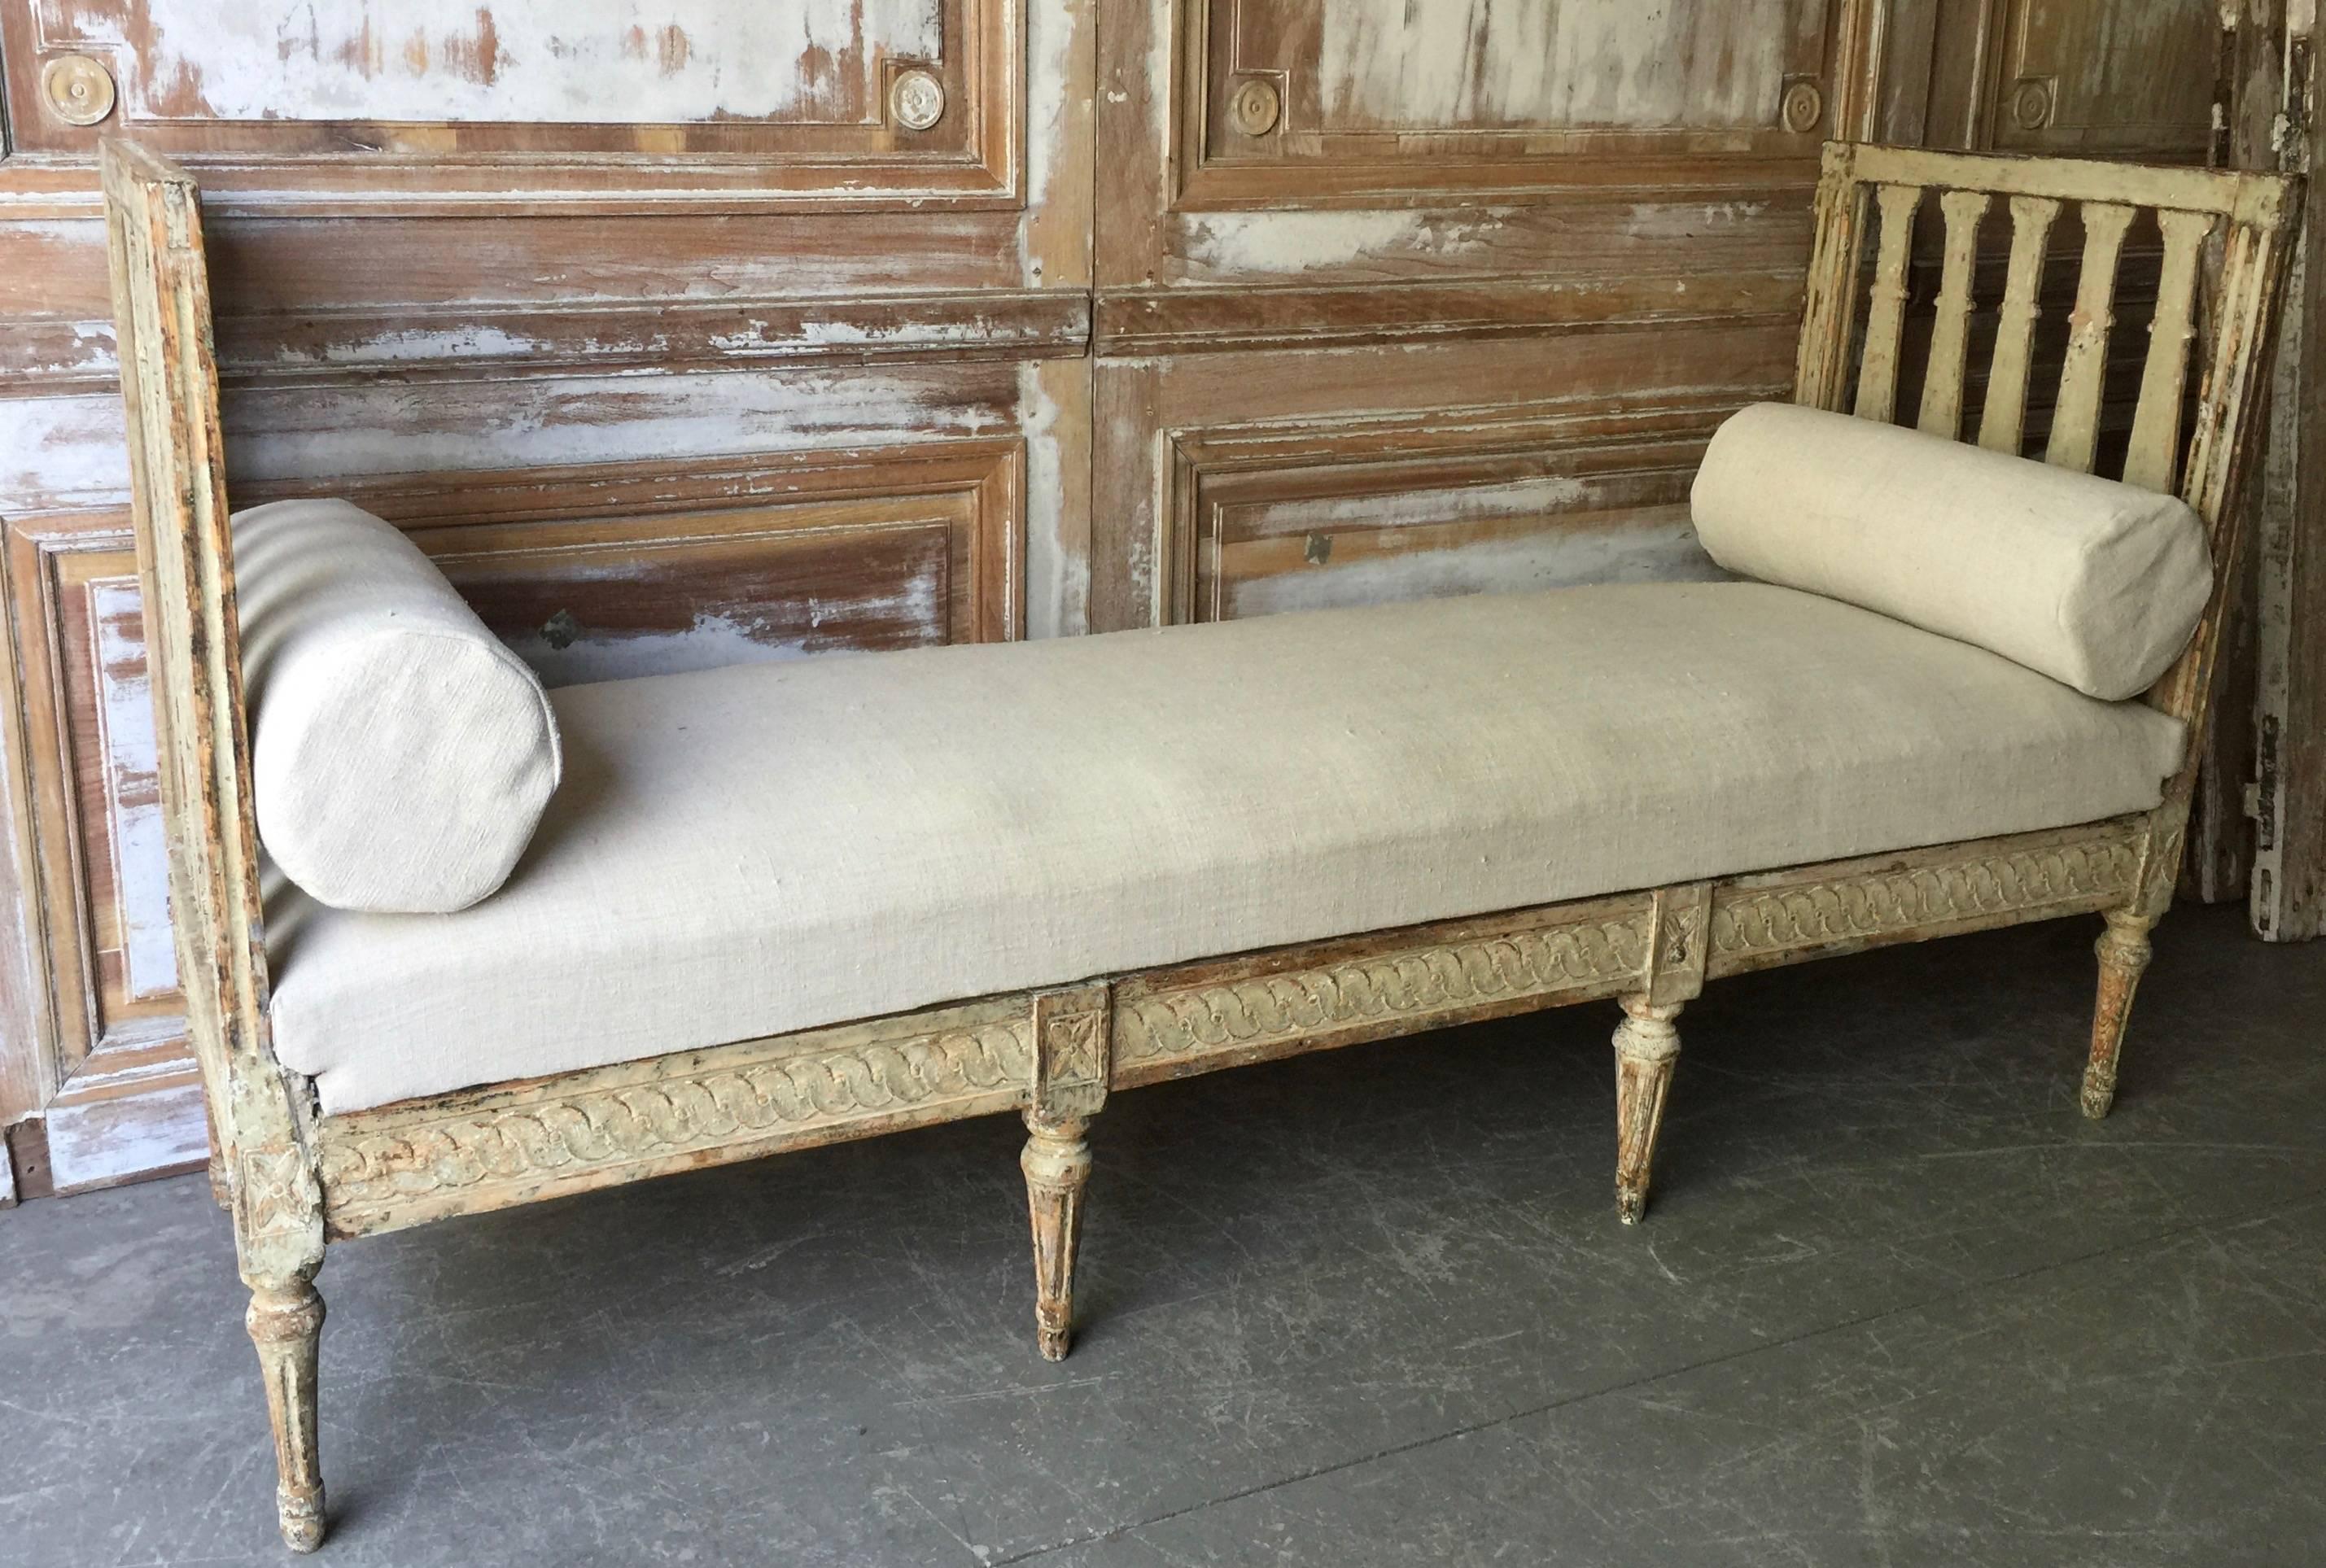 Simple, elegant, richly carved, late 18th century Swedish period Gustavian daybed witch three sides are detailed in Guilloché carvings and rosettes on beautifully carved tapered legs - all retaining original time worn patina. Upholstered in